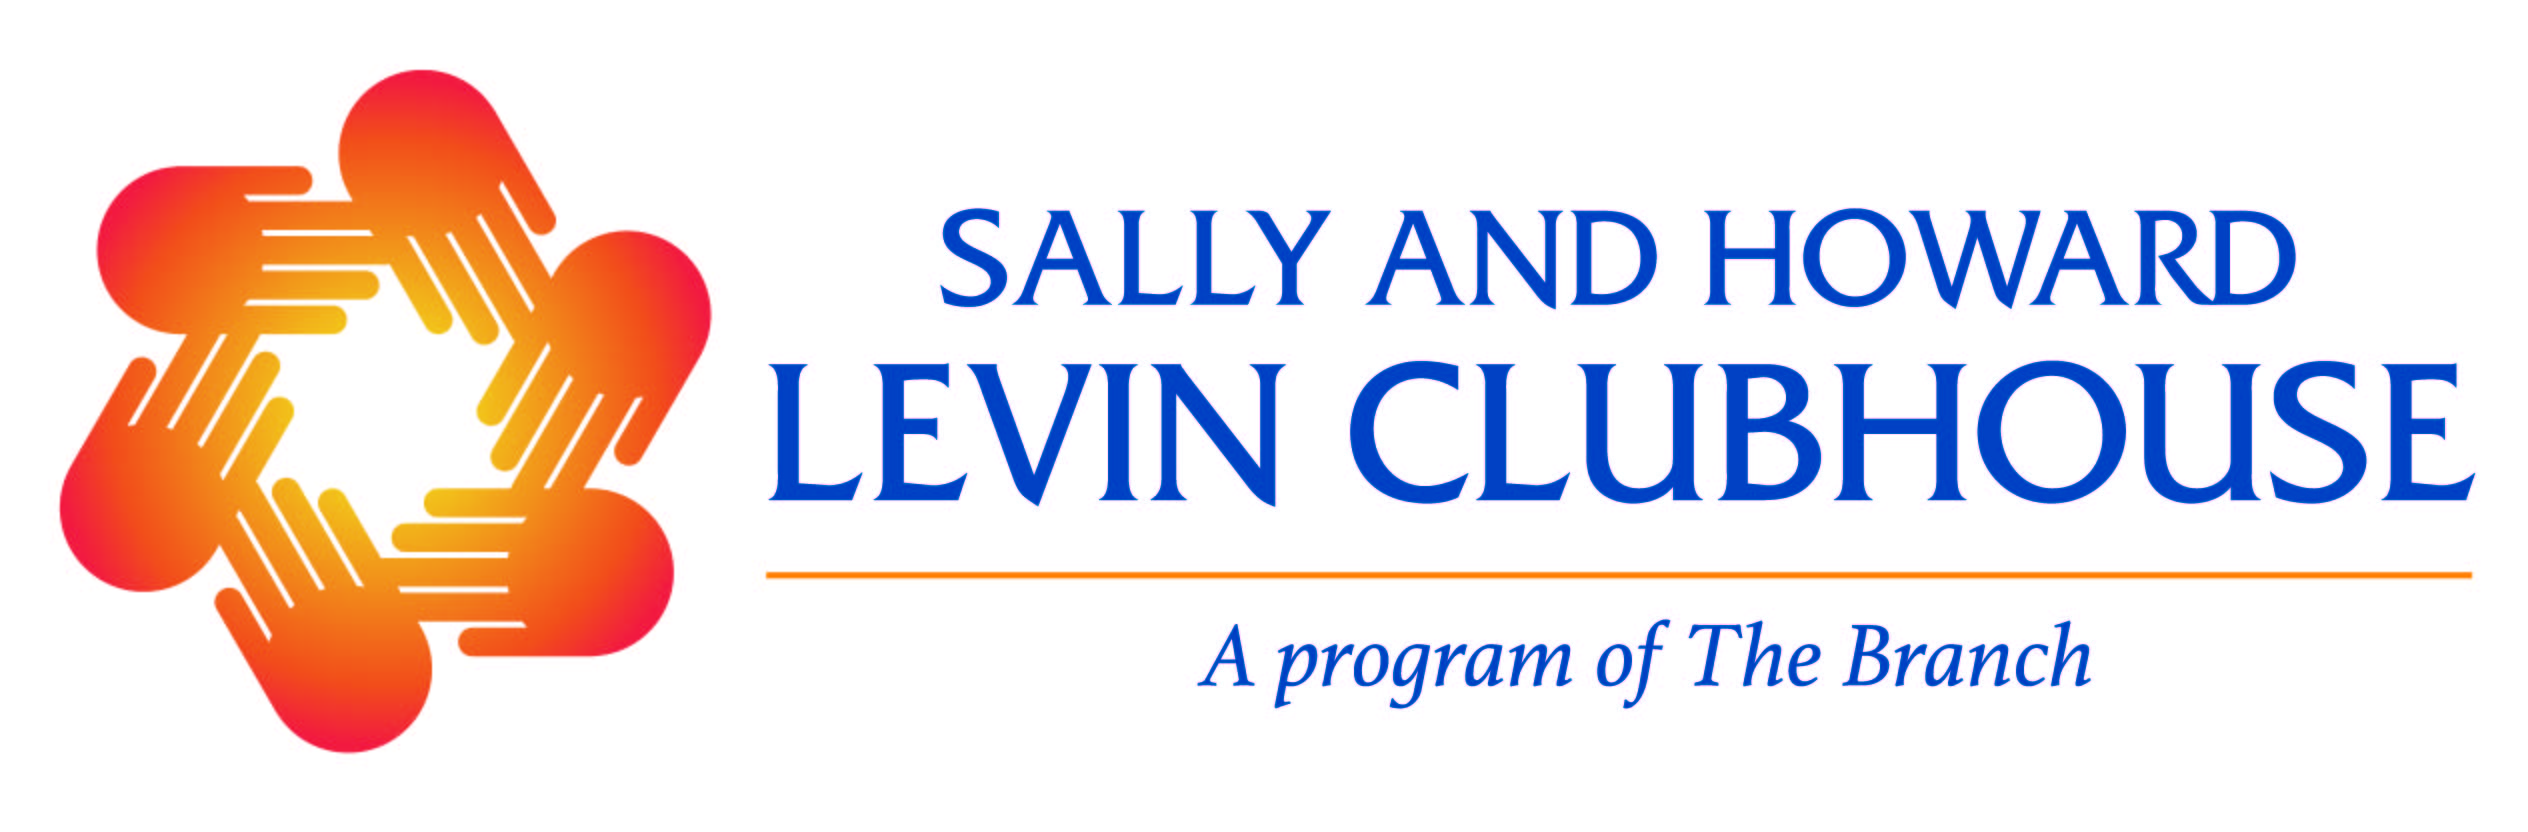 Sally and Howard Levin Clubhouse